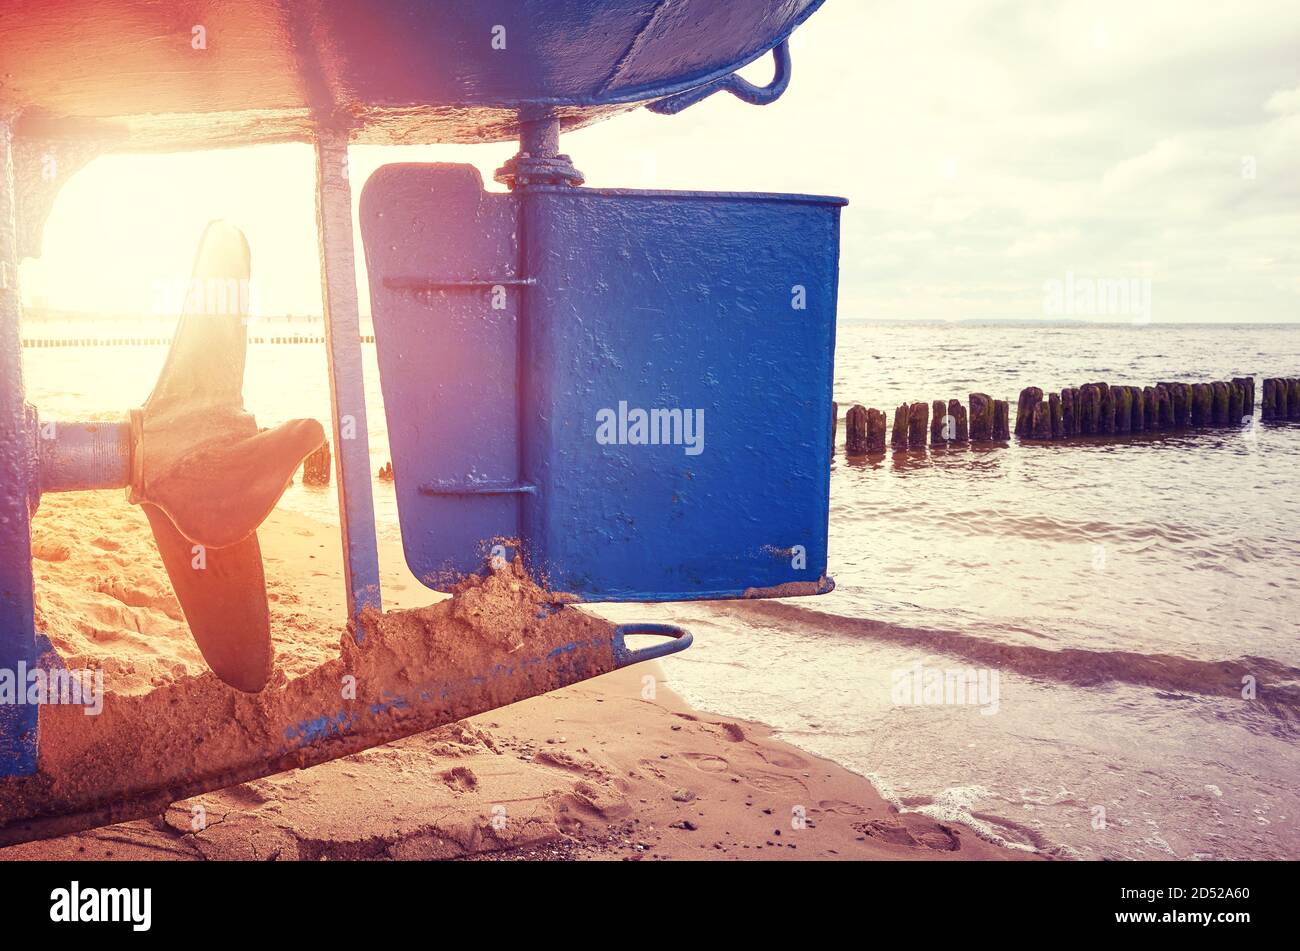 Fishing boat rudder and propeller on a beach at sunset, color toning applied. Stock Photo